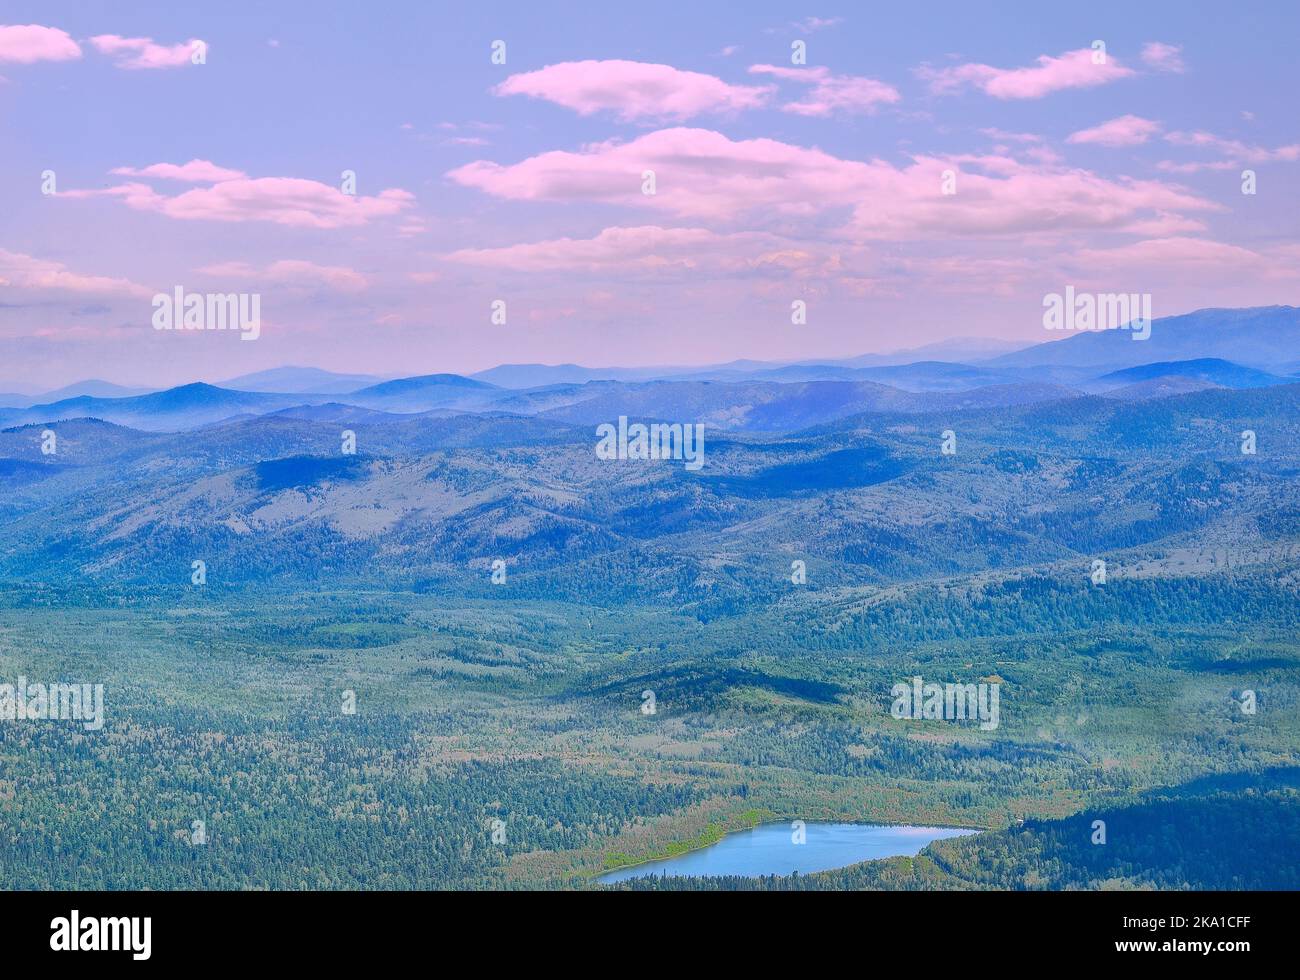 Mountain valley with blue lake among deep forests in pink morning light - idyllic summer landscape. Mountain peaks under blue morning mist and pink cl Stock Photo